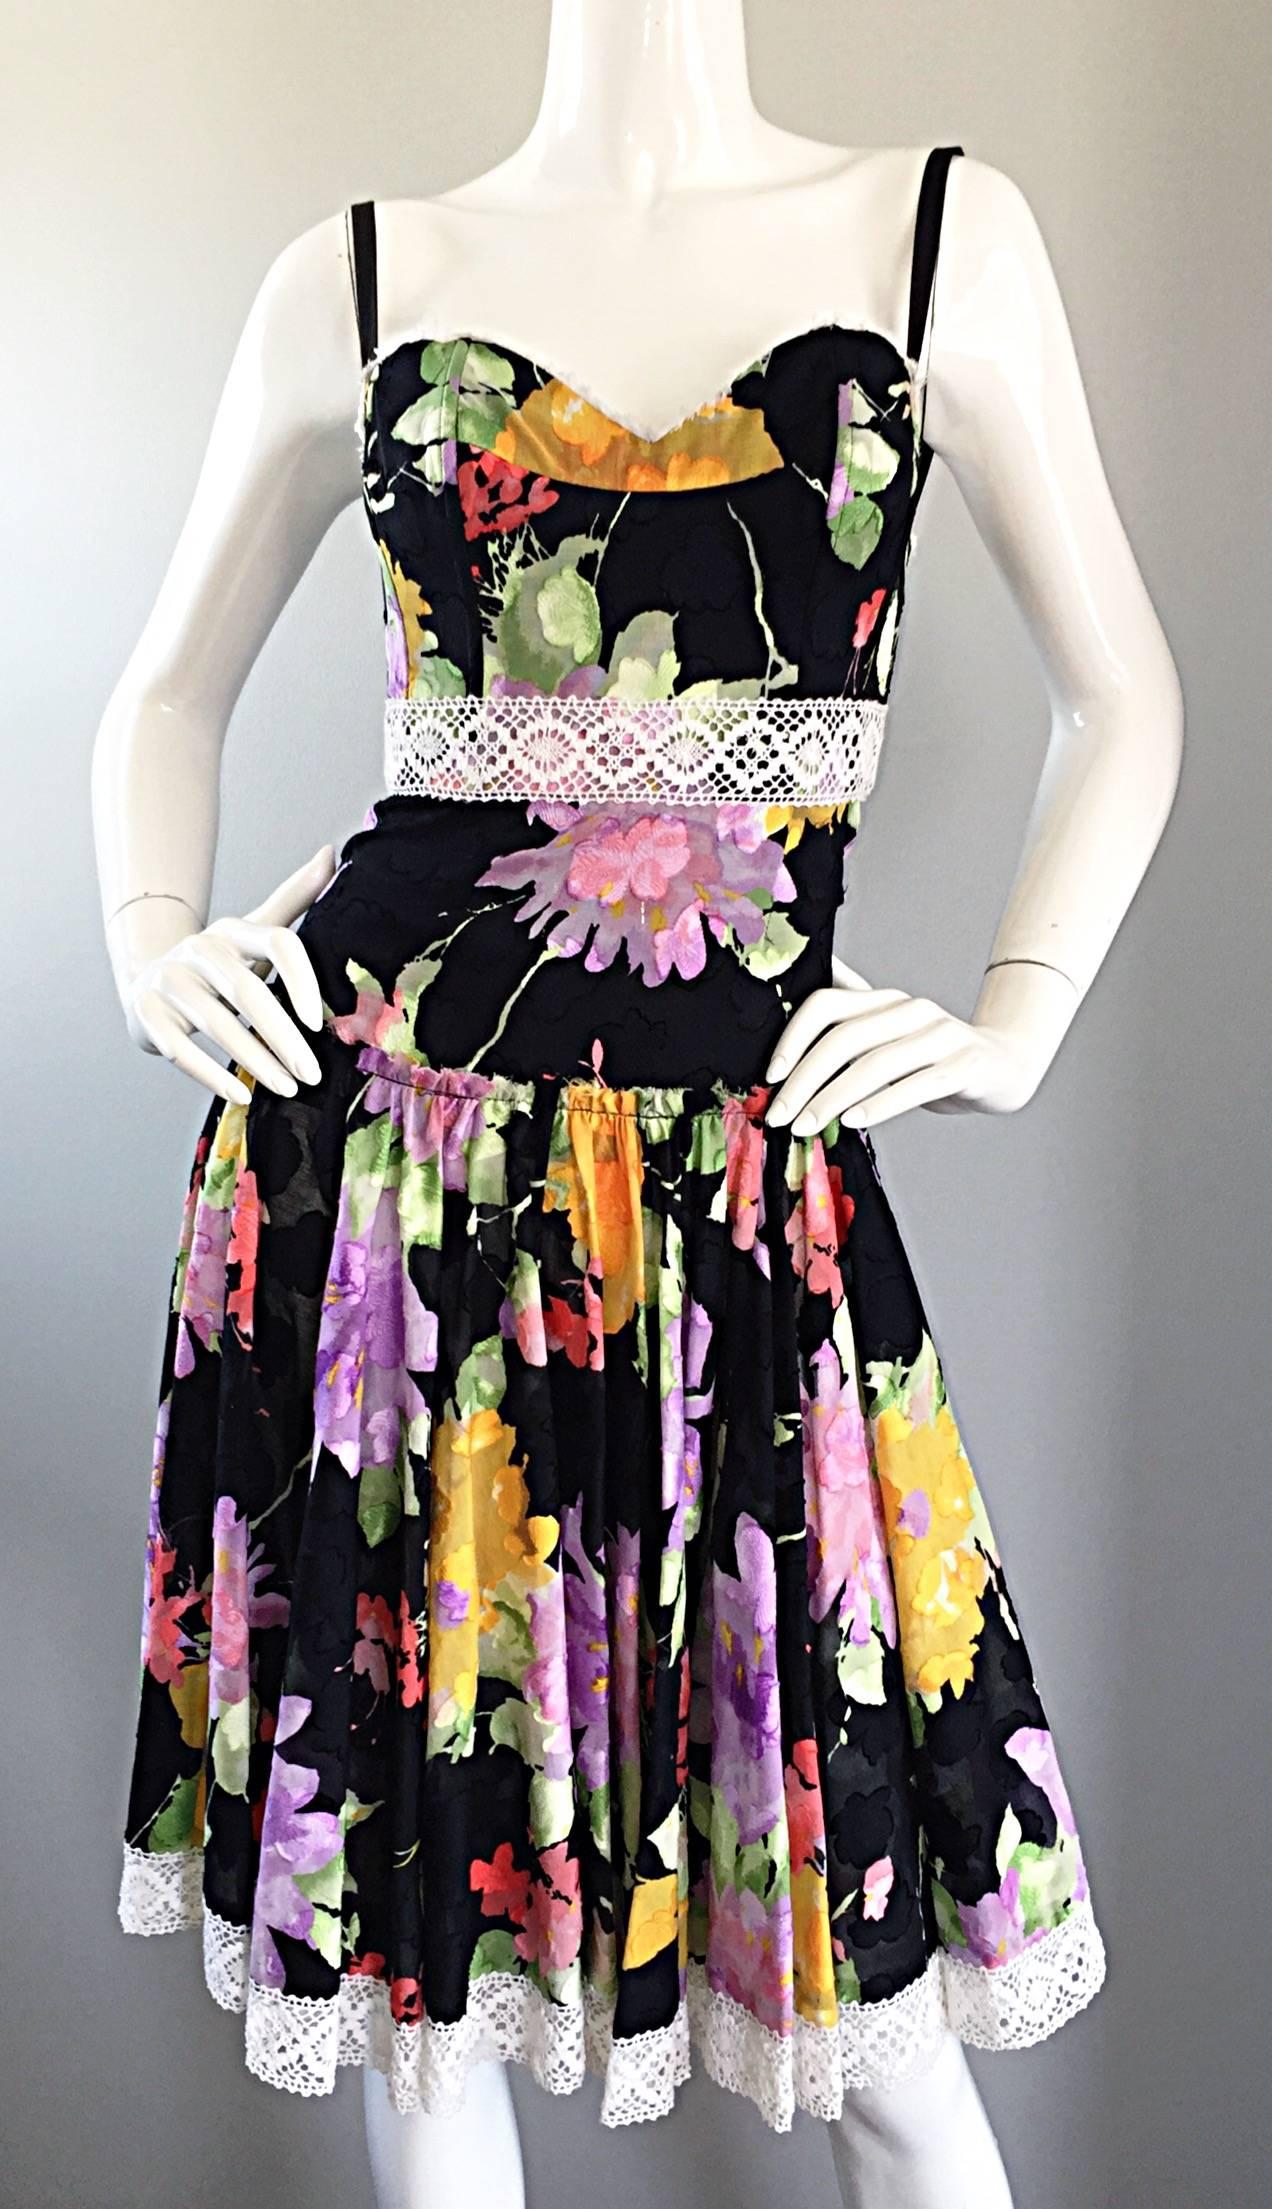 Tracy Feith Black Cotton Floral Print Lace Pretty Sun Dress w/ Full Skirt 2